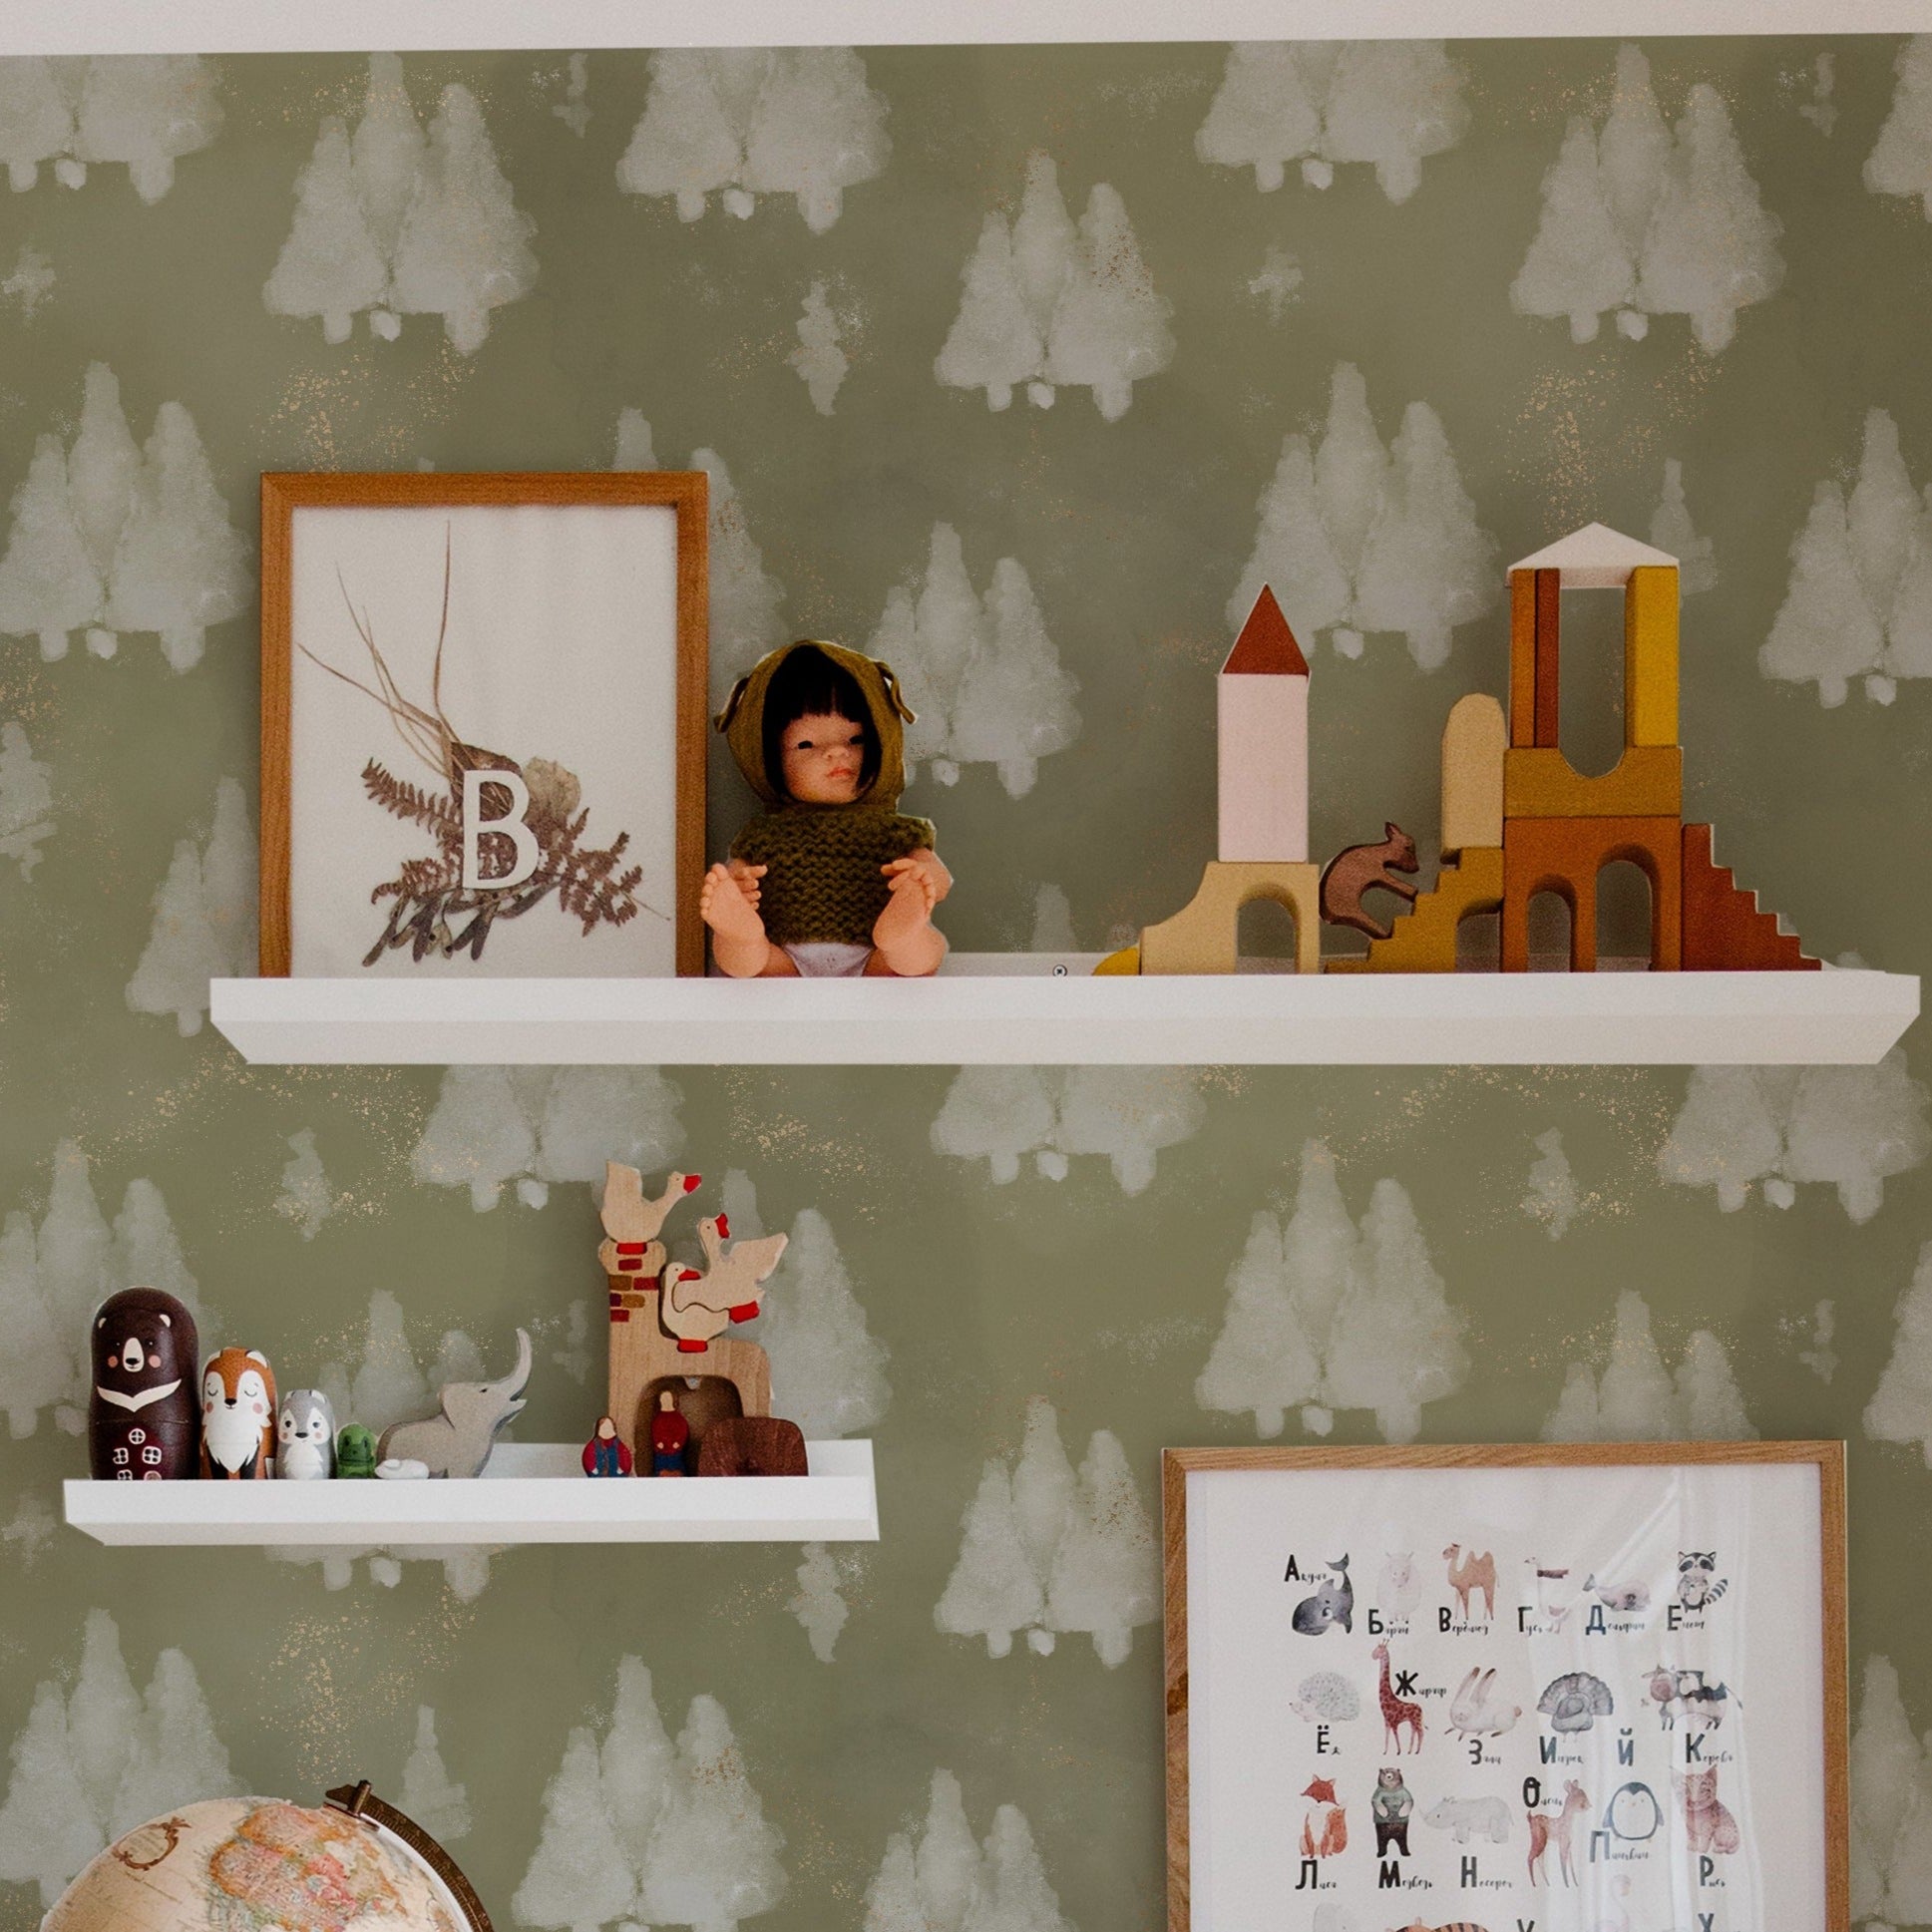 A stylish room featuring Shimmer Tree Wallpaper, showcasing a pattern of white snowy trees on a muted olive green background, with sparkling gold accents giving a festive and magical look. The room is decorated with toys and educational items on white shelves, enhancing the cozy, wintery theme.